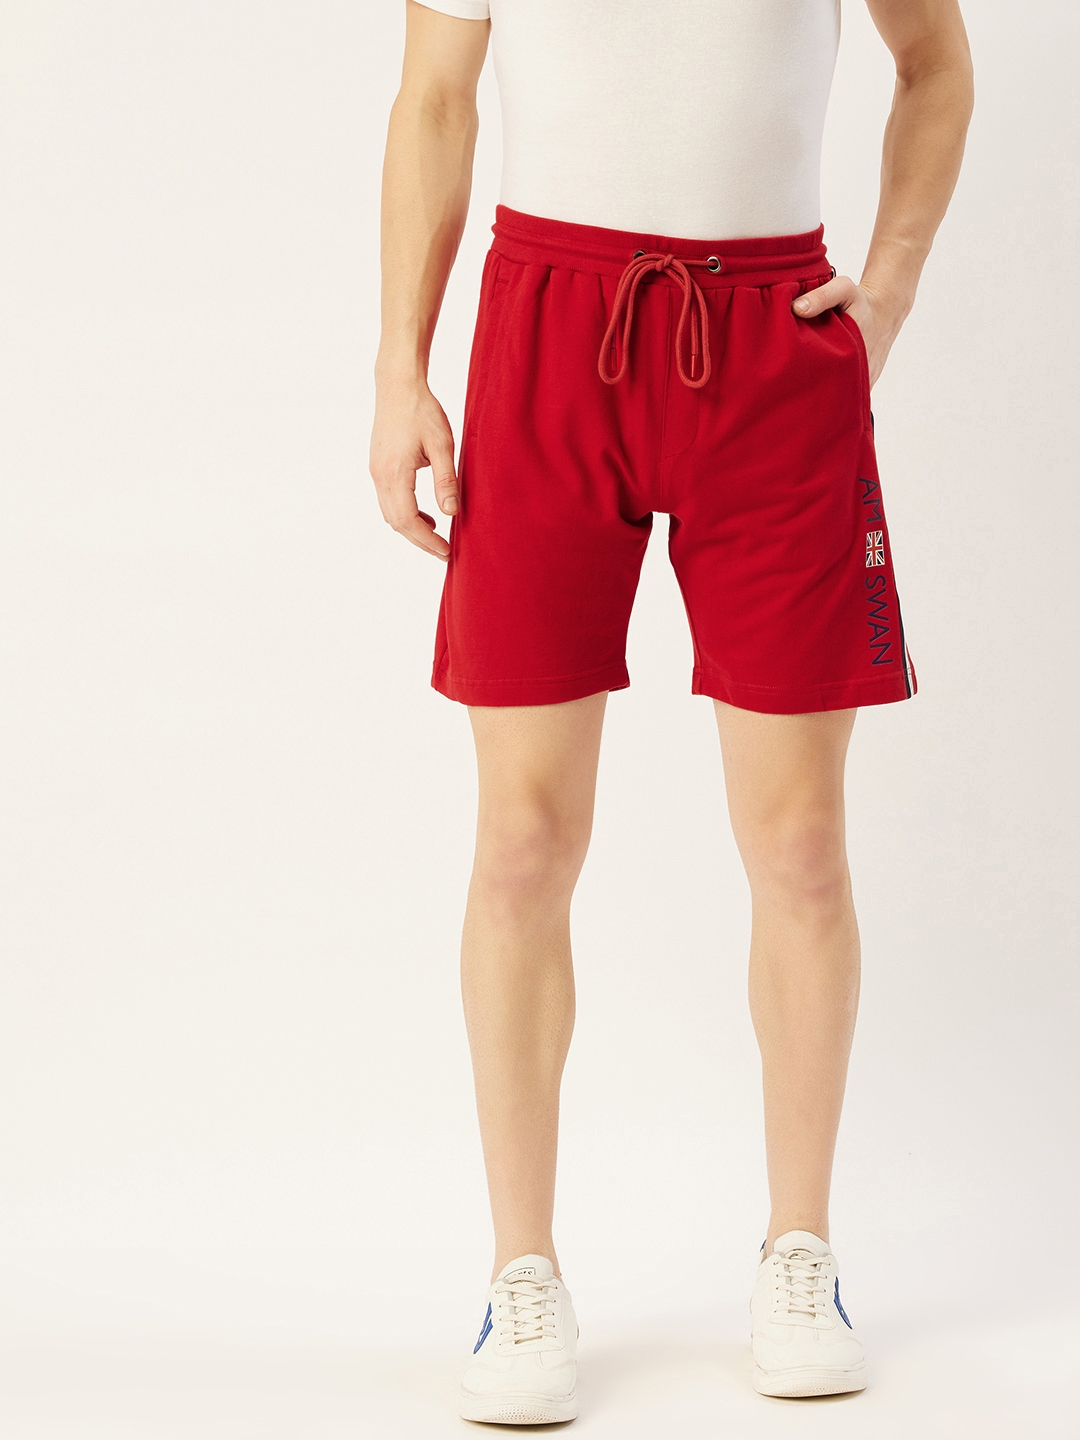 Am Swan | Cotton Lycra Red Smart Fit Printed Shorts